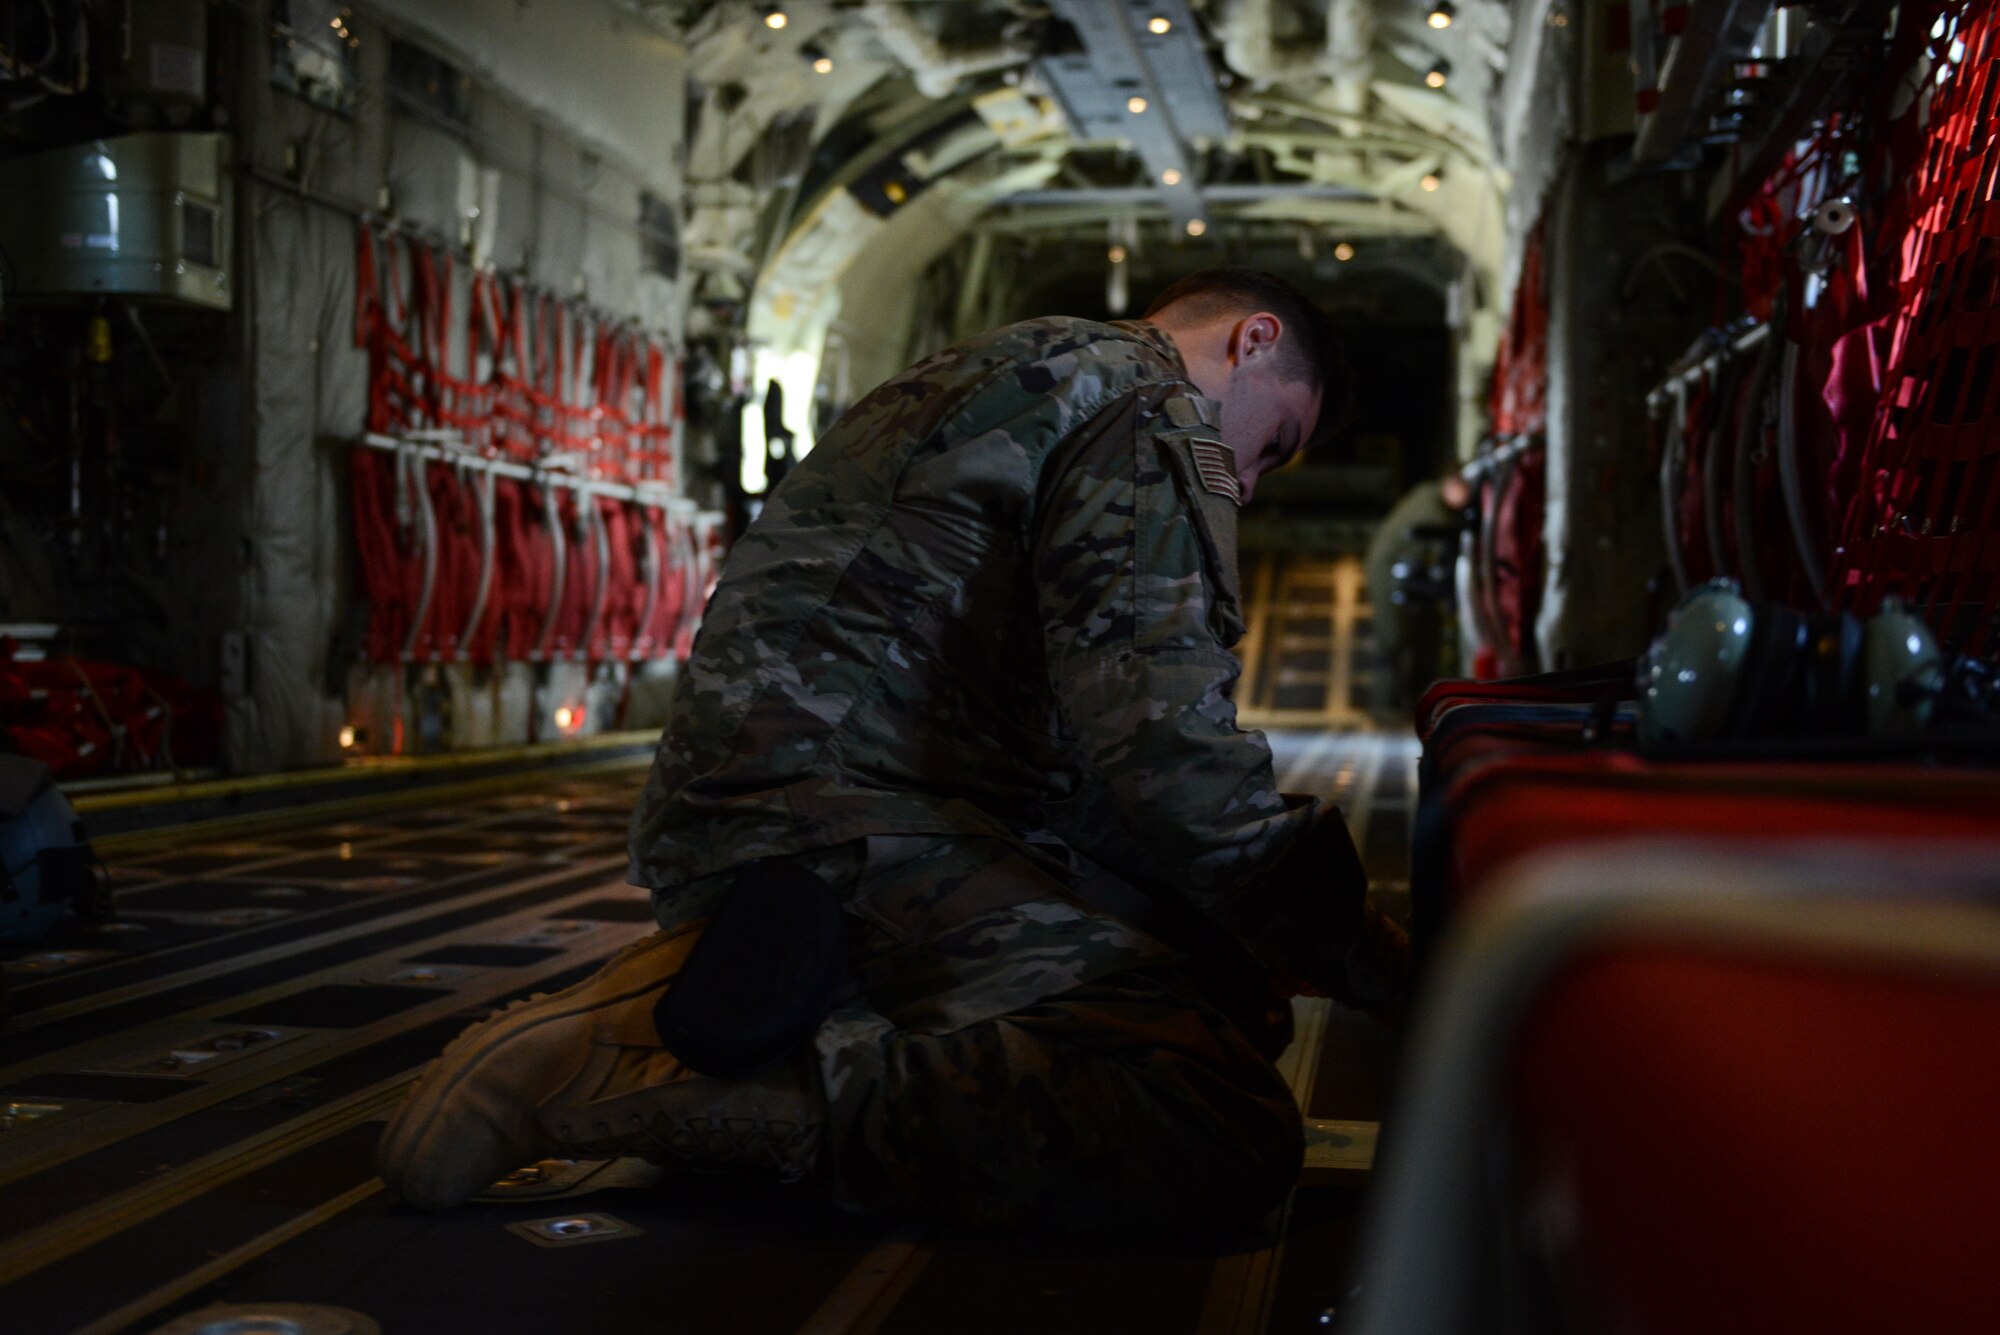 U.S. Air Force Airman Jaden Thompson, 86th Maintenance Squadron aerospace maintenance apprentice, secures seats in the back of aircraft 5840 at Ramstein air base, Germany, Aug. 29, 2019.